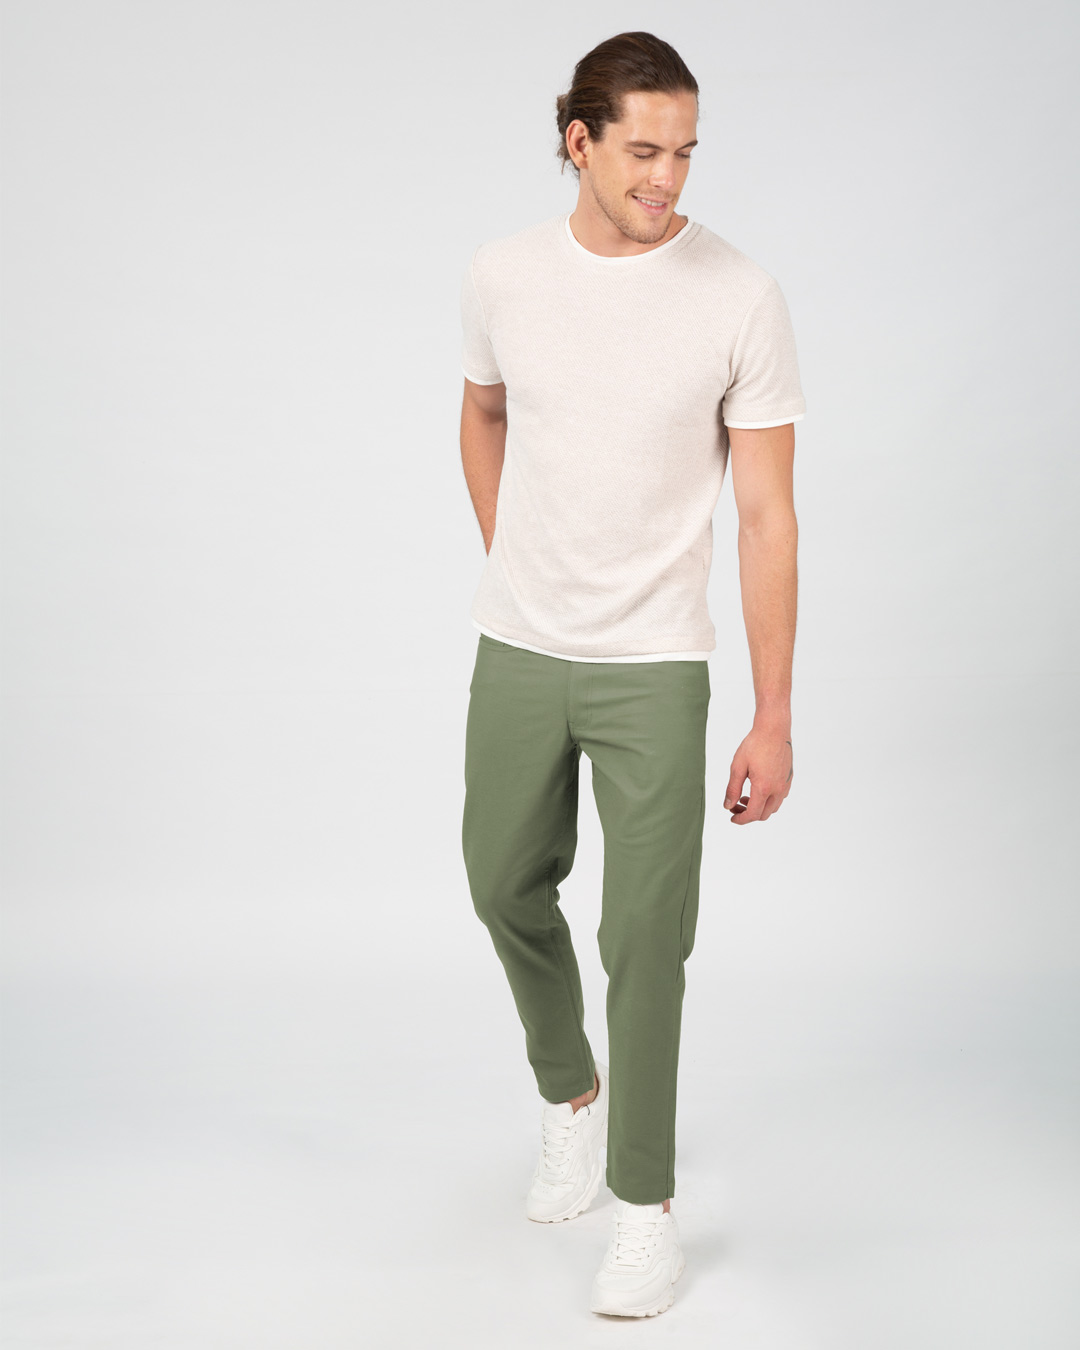 Ankle Length Pista Green color Lycra Pin Tucks Staright Pant with single  pocket for women Trousers